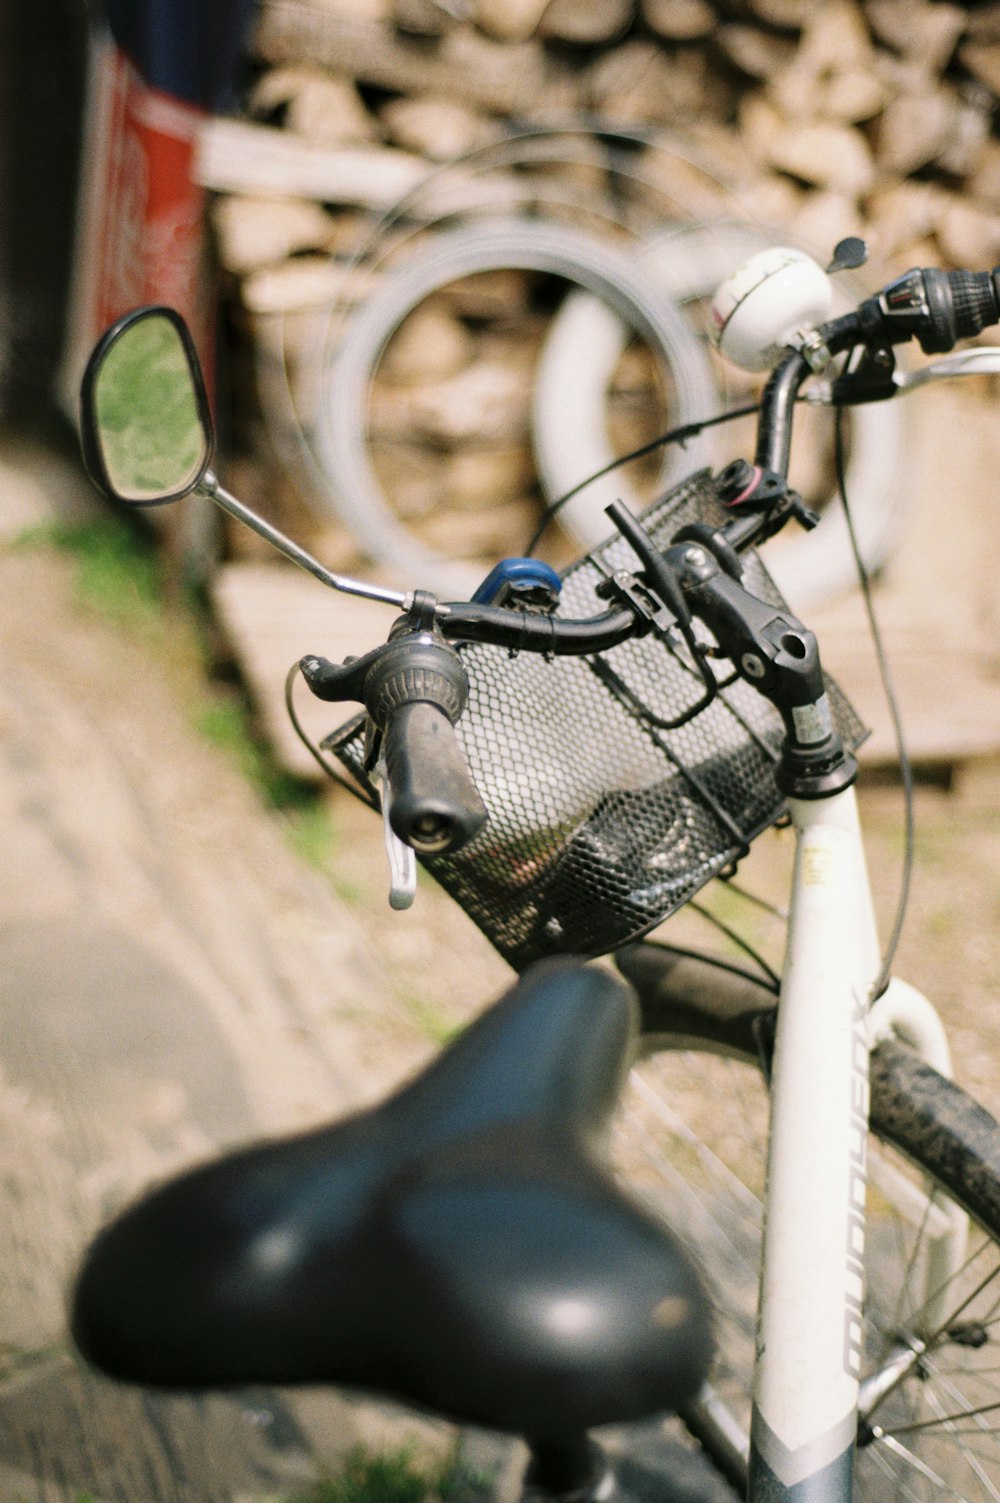 a close up of a bicycle handlebar with a bag on it